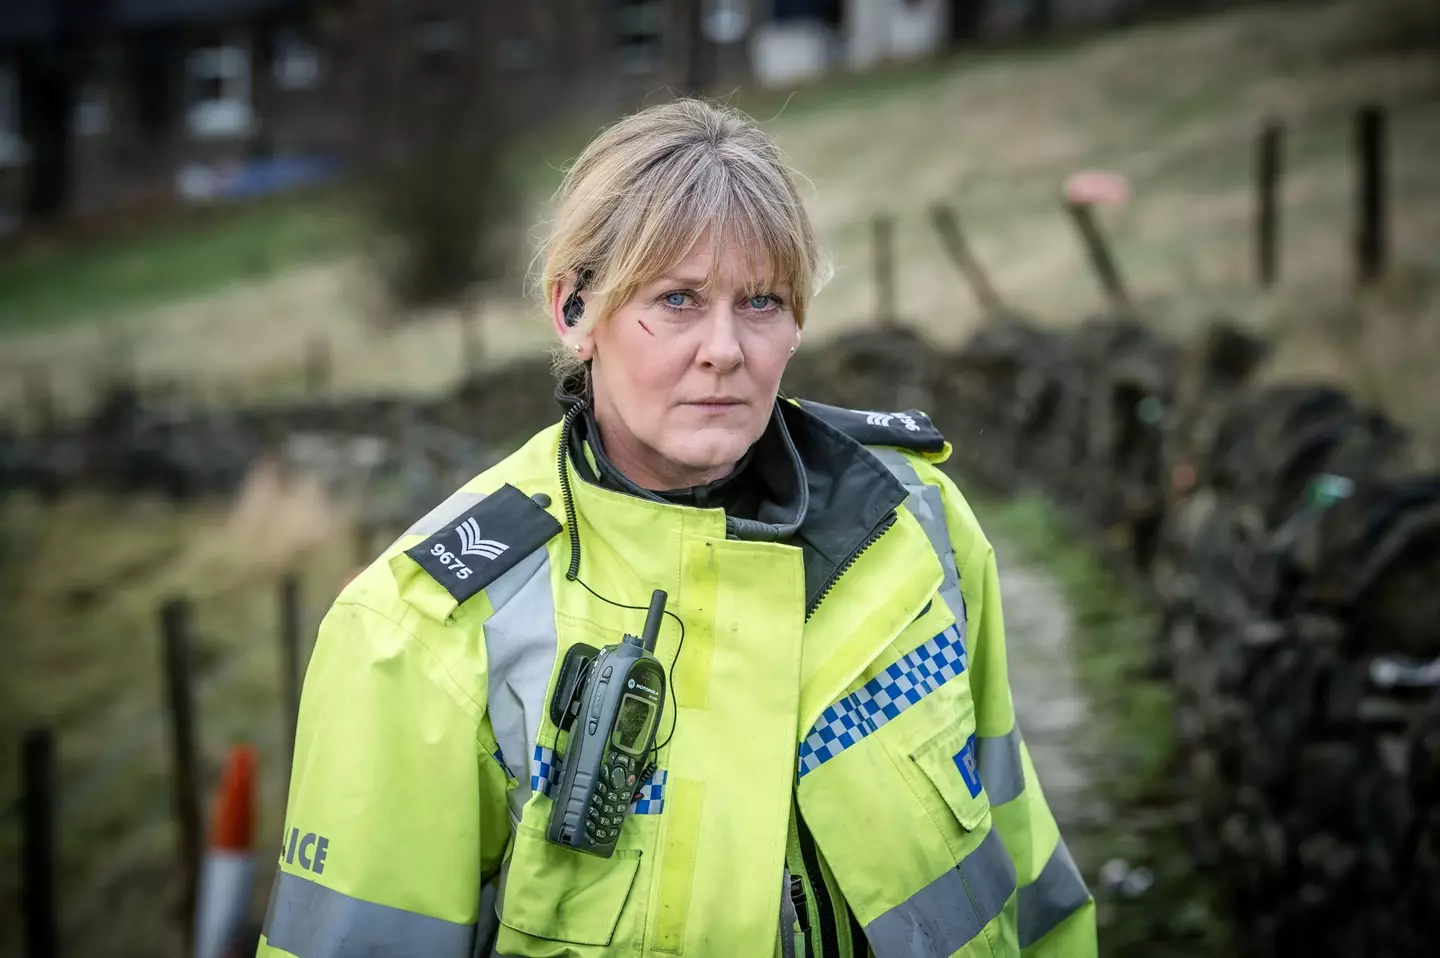 Happy Valley viewers are adoring Sarah Lancashire's performance.